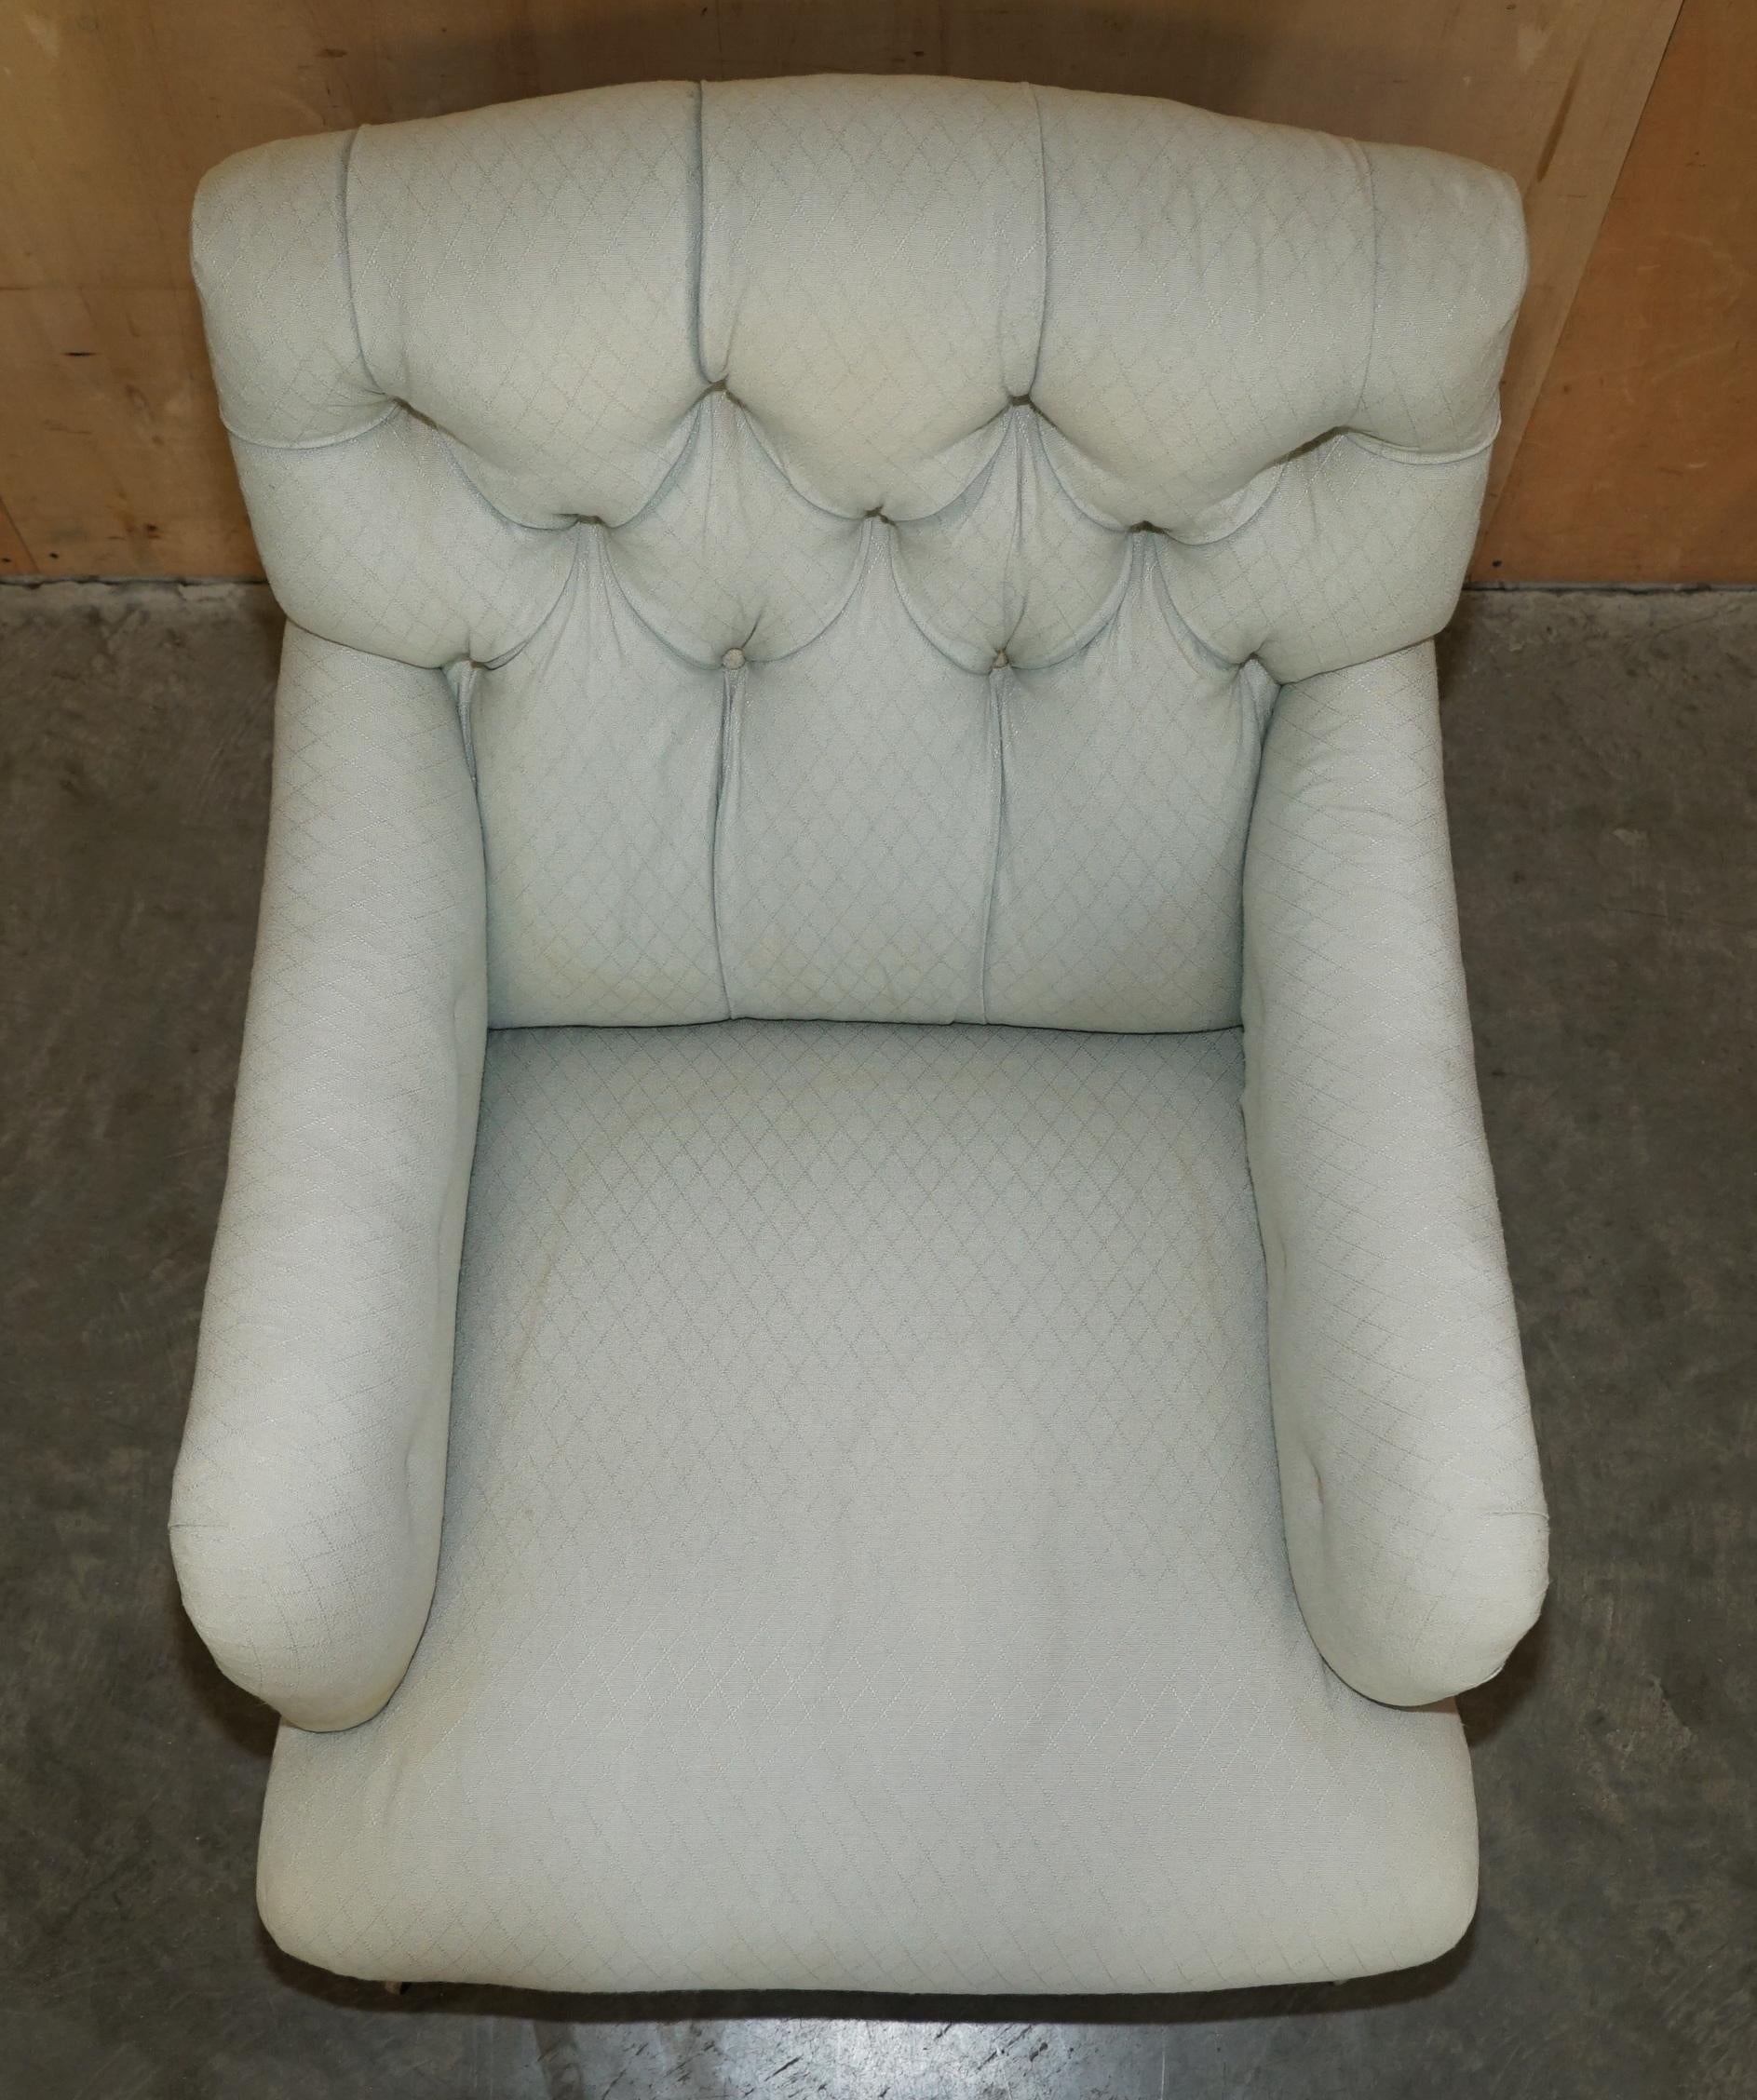 Upholstery RARE ORIGINAL ViCTORIAN HOWARD & SONS BRIDGEWATER ARMCHAIR PERIOD UPHOLSTERY For Sale